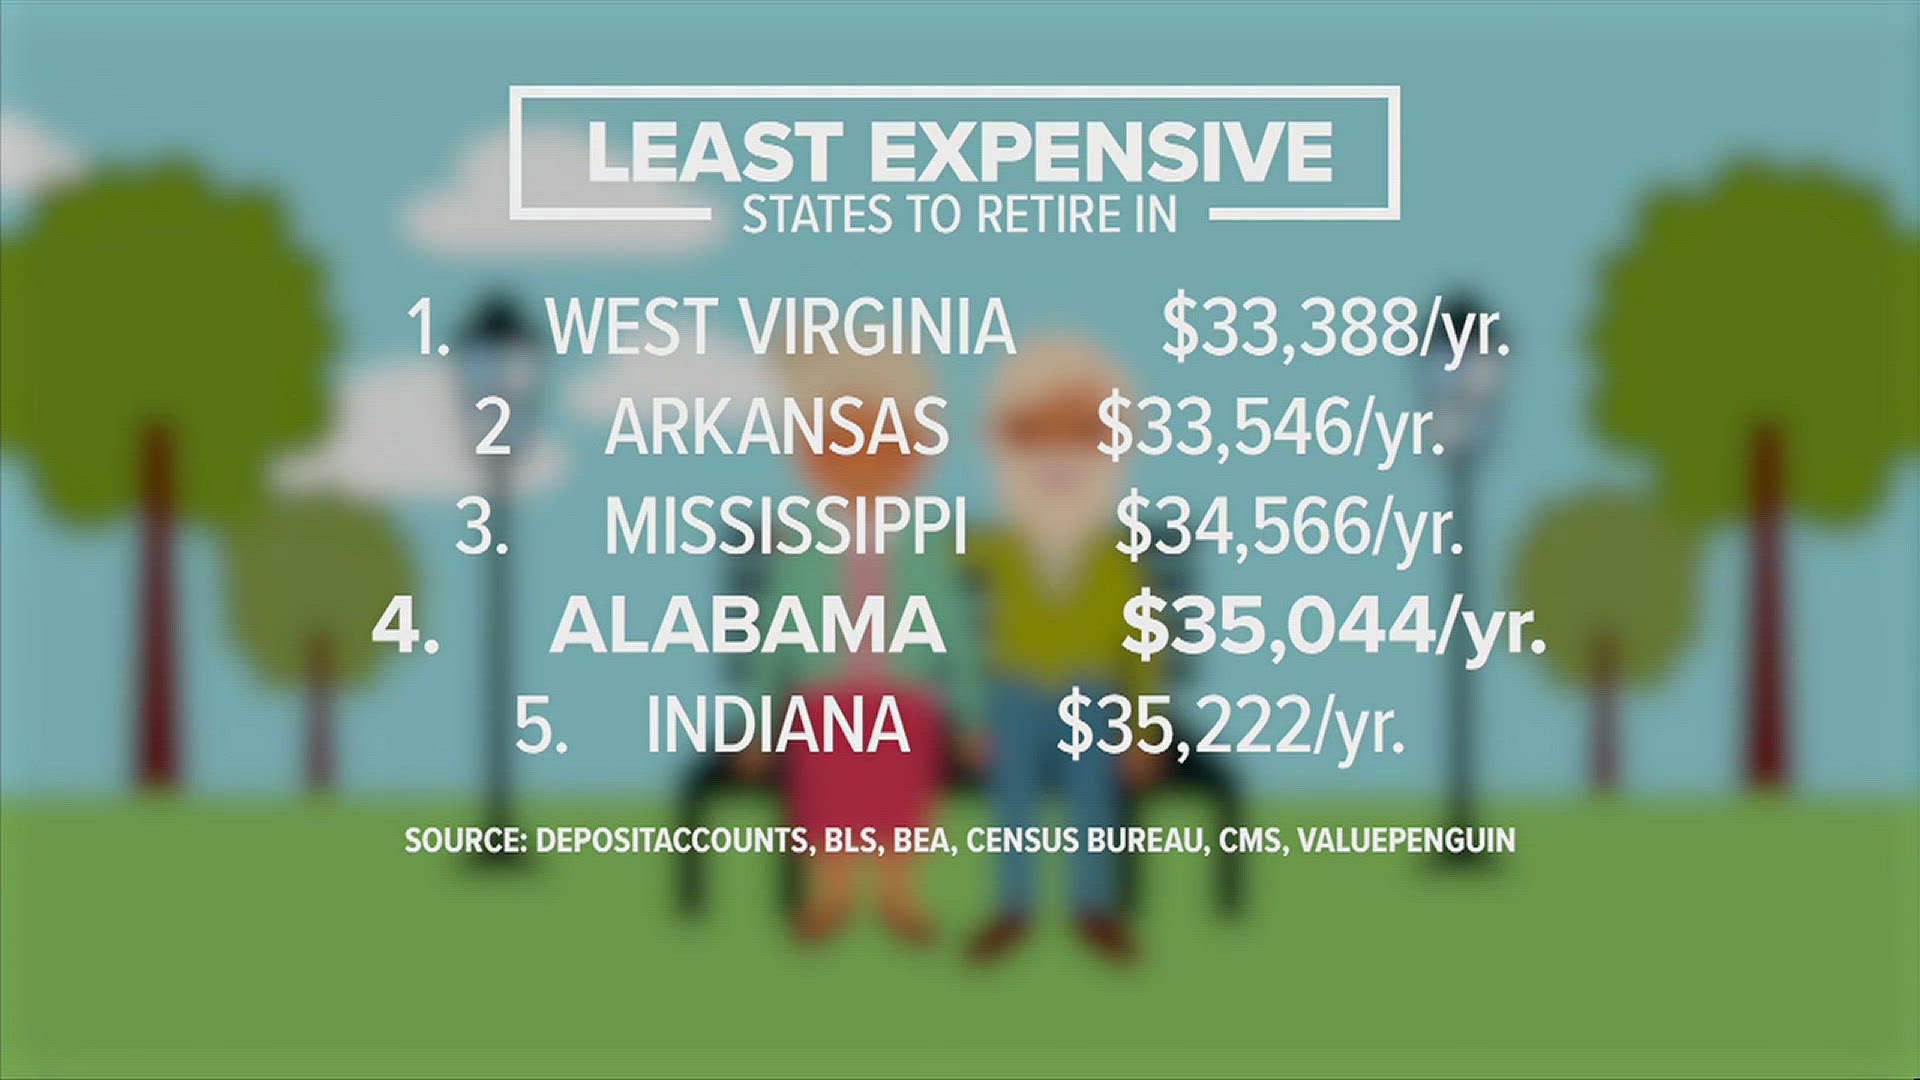 A recent study shows Alabama is one of the five most affordable states for retirement living.